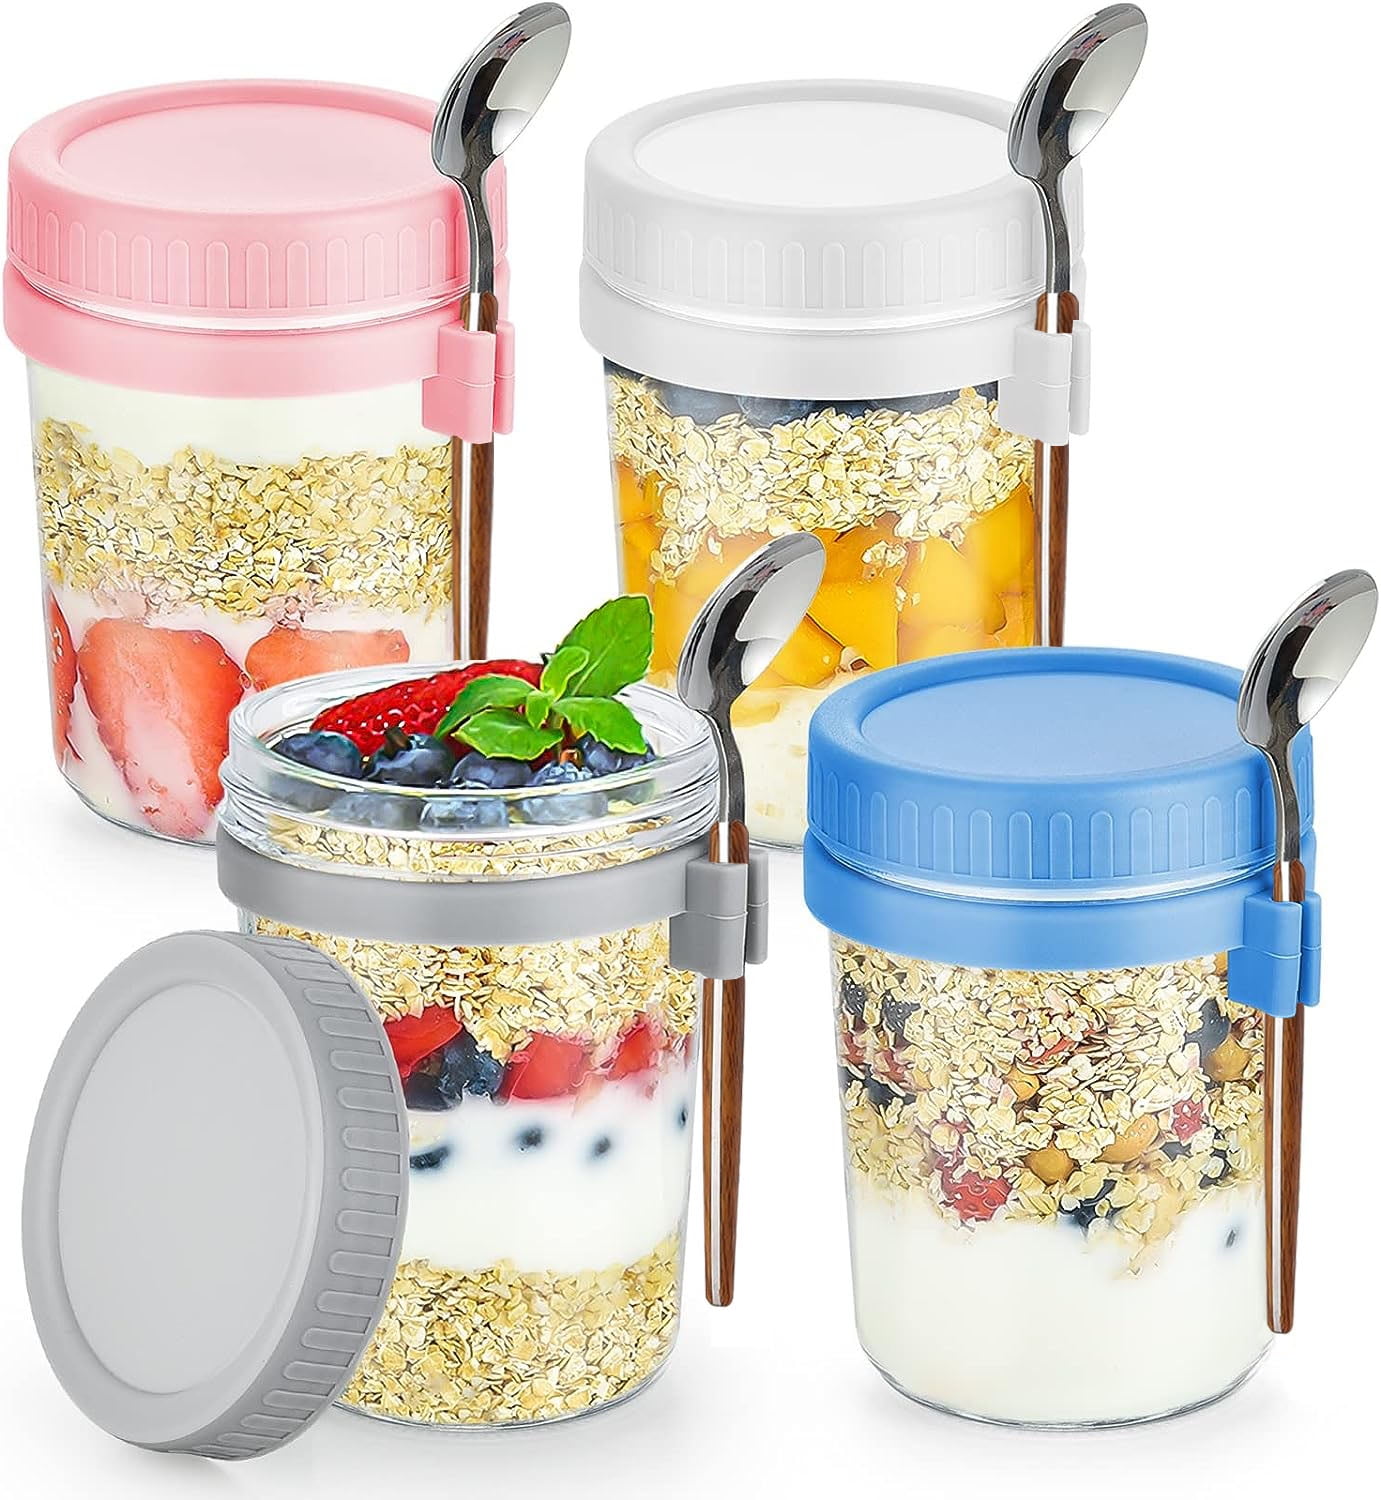 XKDOUS 4 Pack Overnight Oats Containers Jars with Lids and Spoon, 16 oz ...